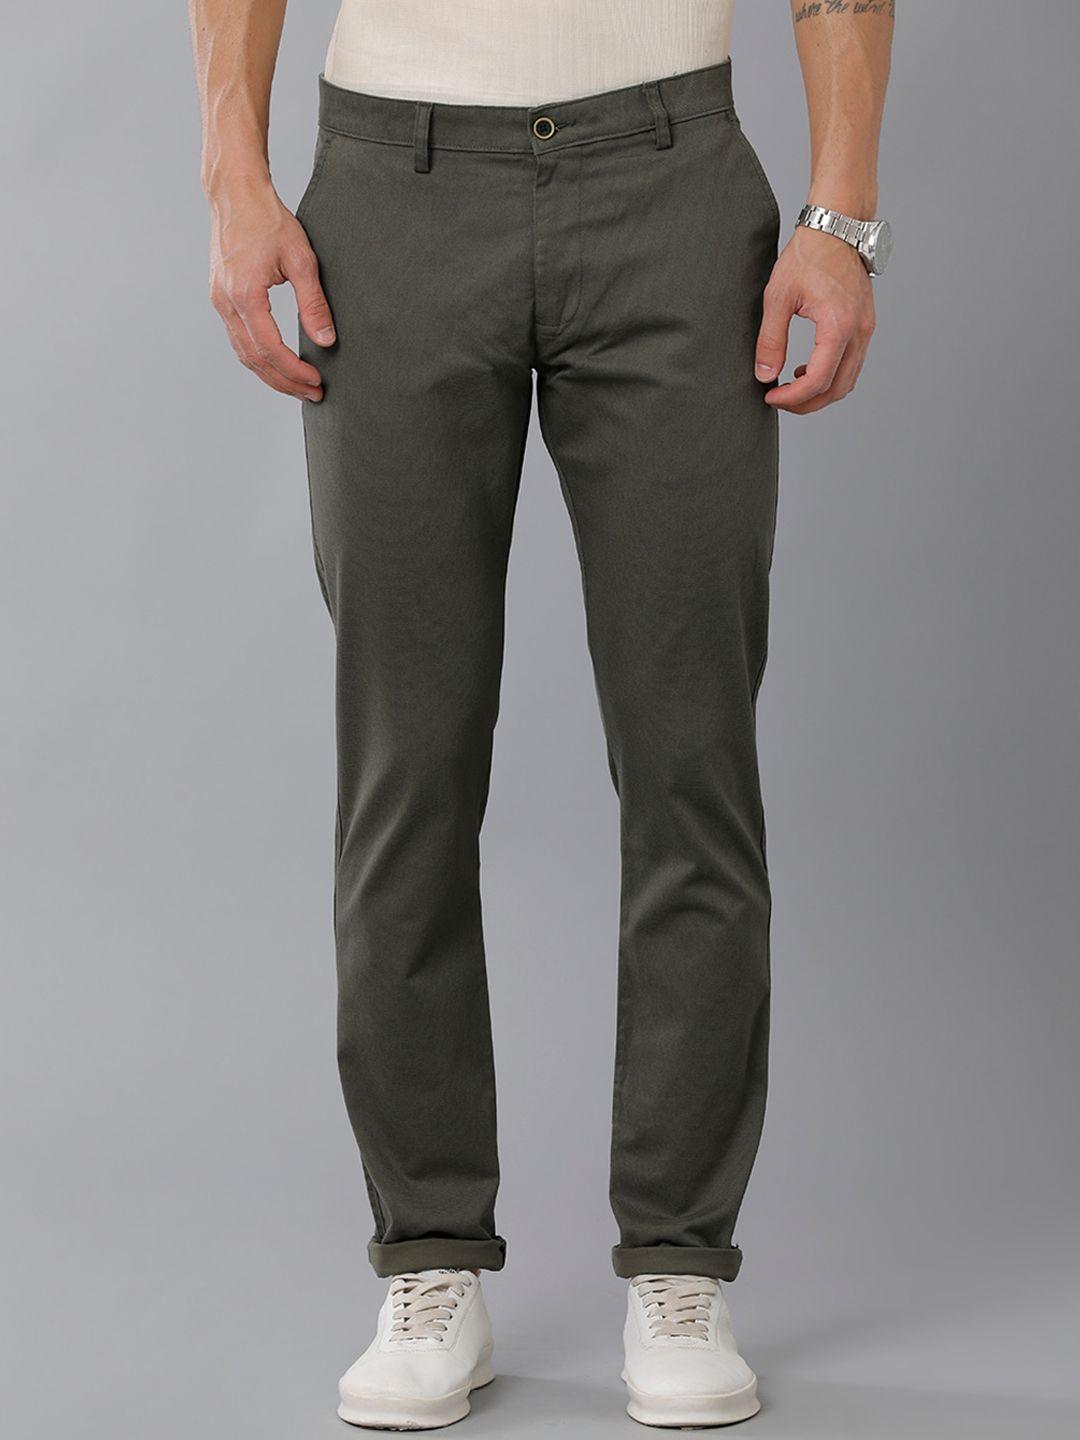 classic polo men classic slim fit chinos mid-rise trousers